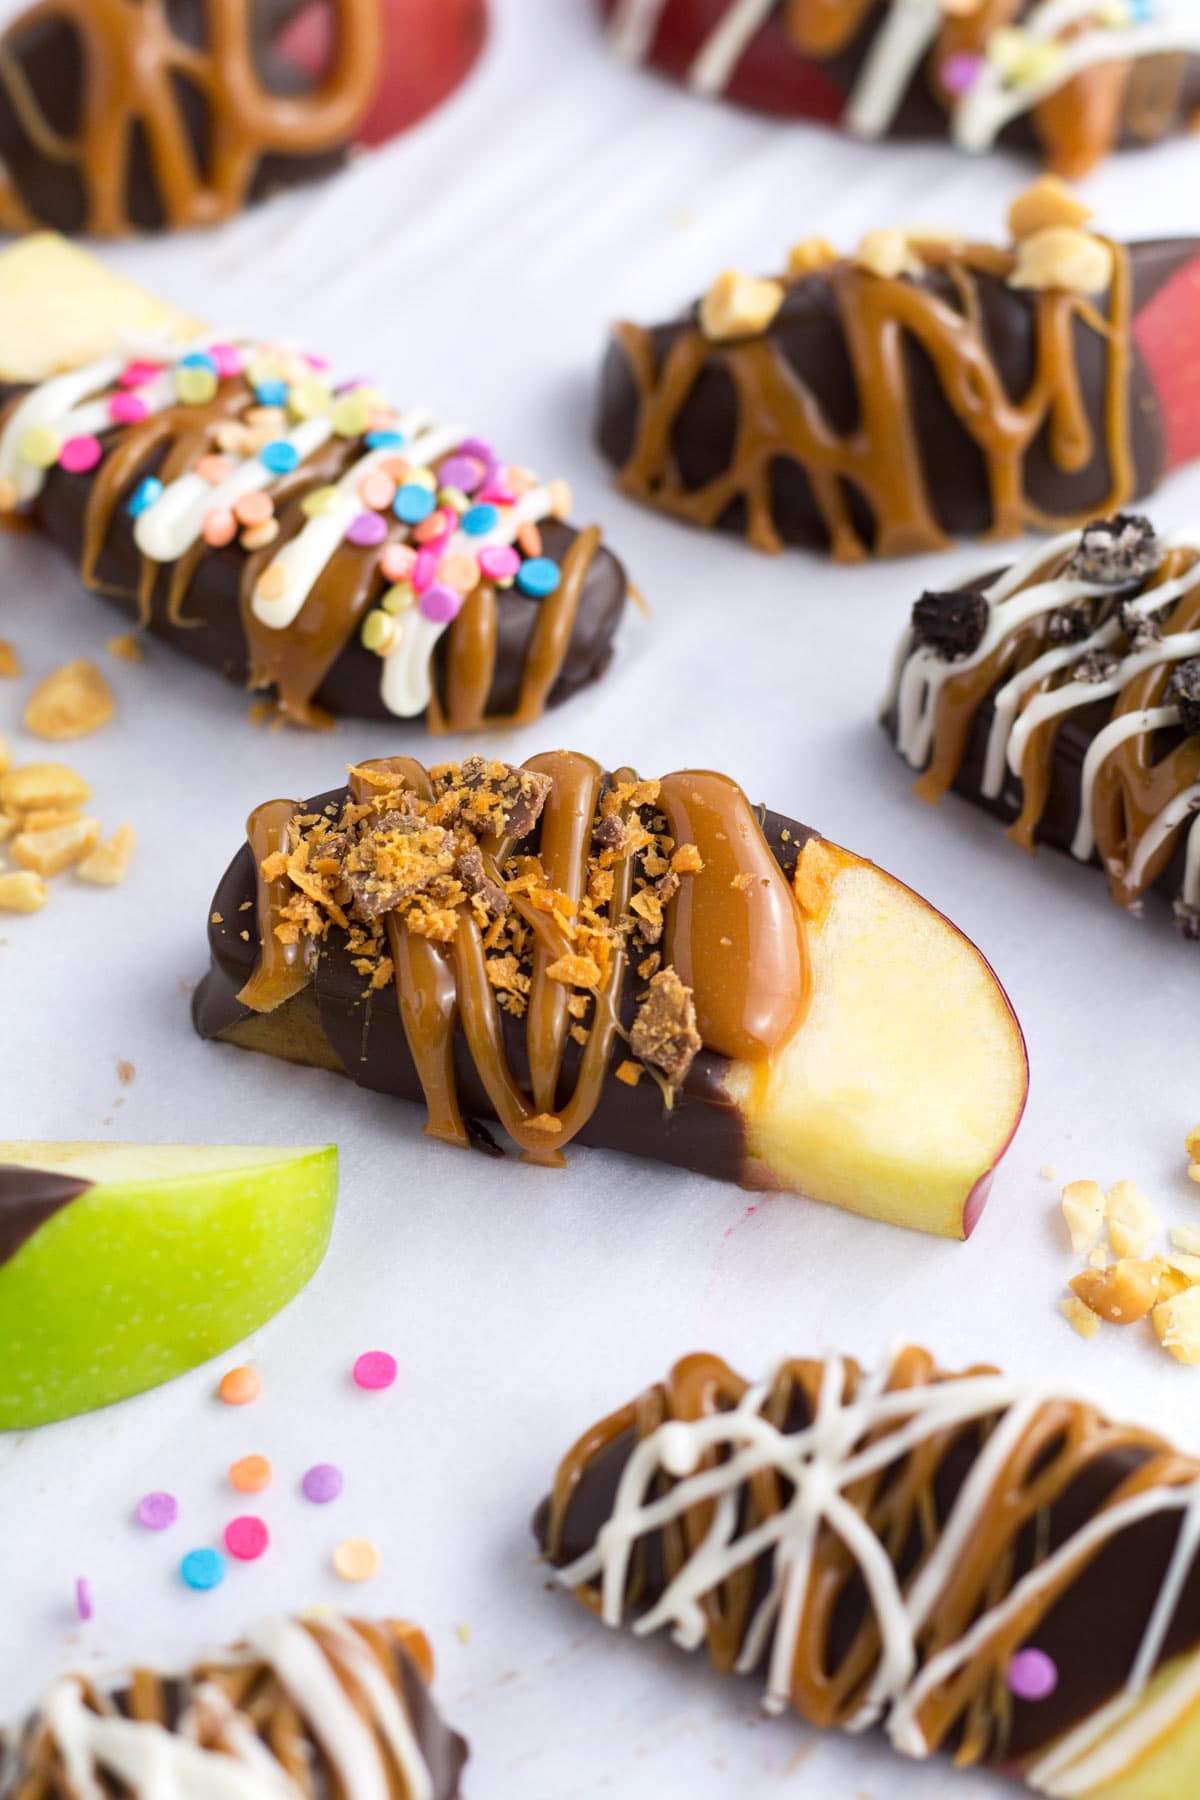 Caramel apple slices with different toppings on parchment paper.